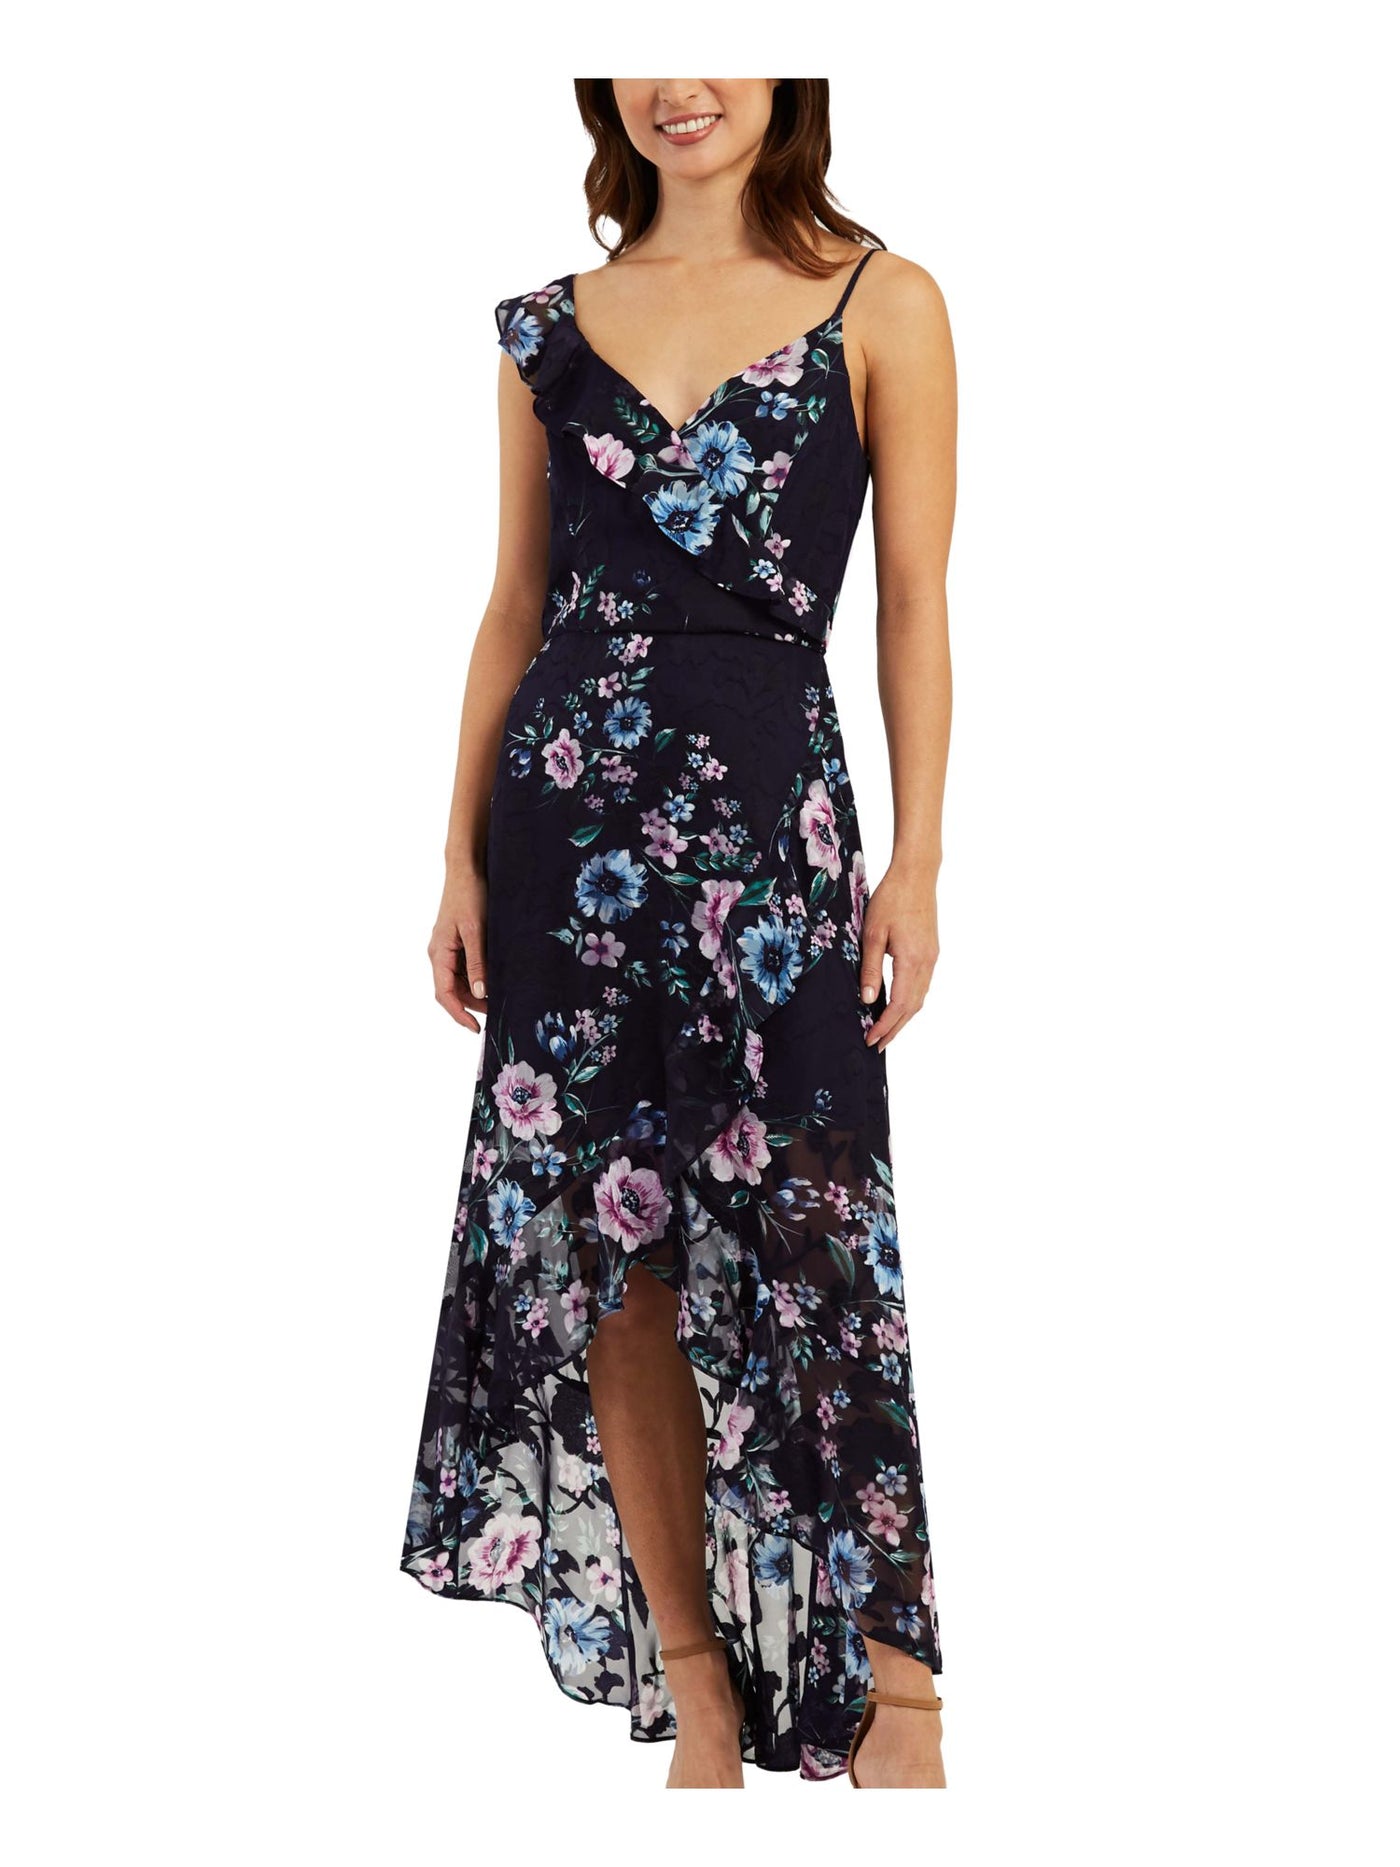 BCX Womens Navy Ruffled Lined Self-tie Hi-low Hem Asymmetrical Floral Spaghetti Strap V Neck Below The Knee Cocktail Fit + Flare Dress Juniors XS